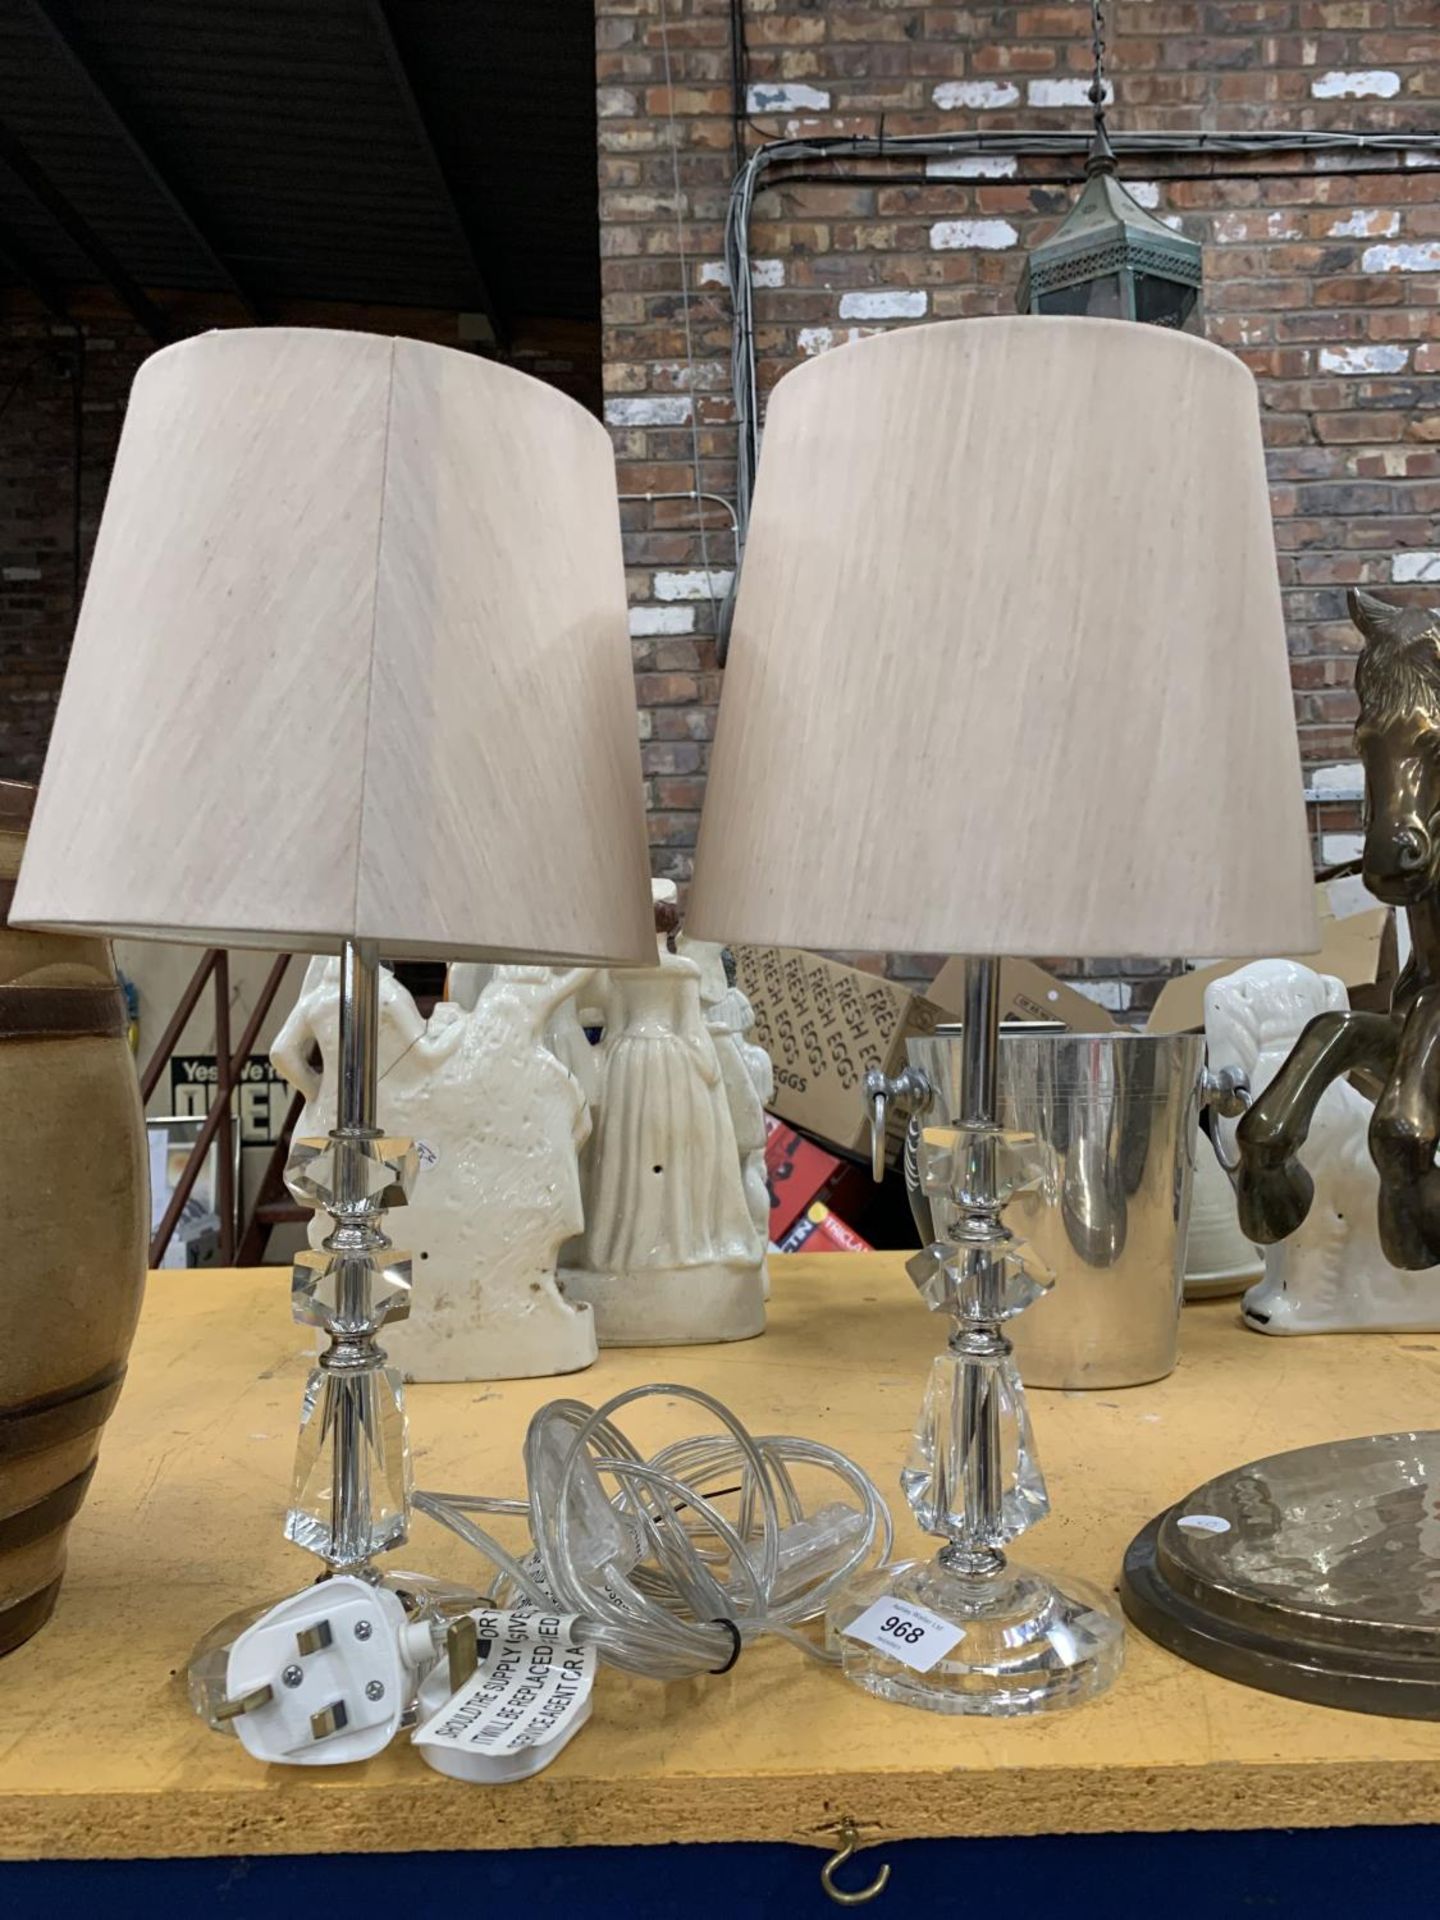 A PAIR OF MODERN TABLE LAMPS